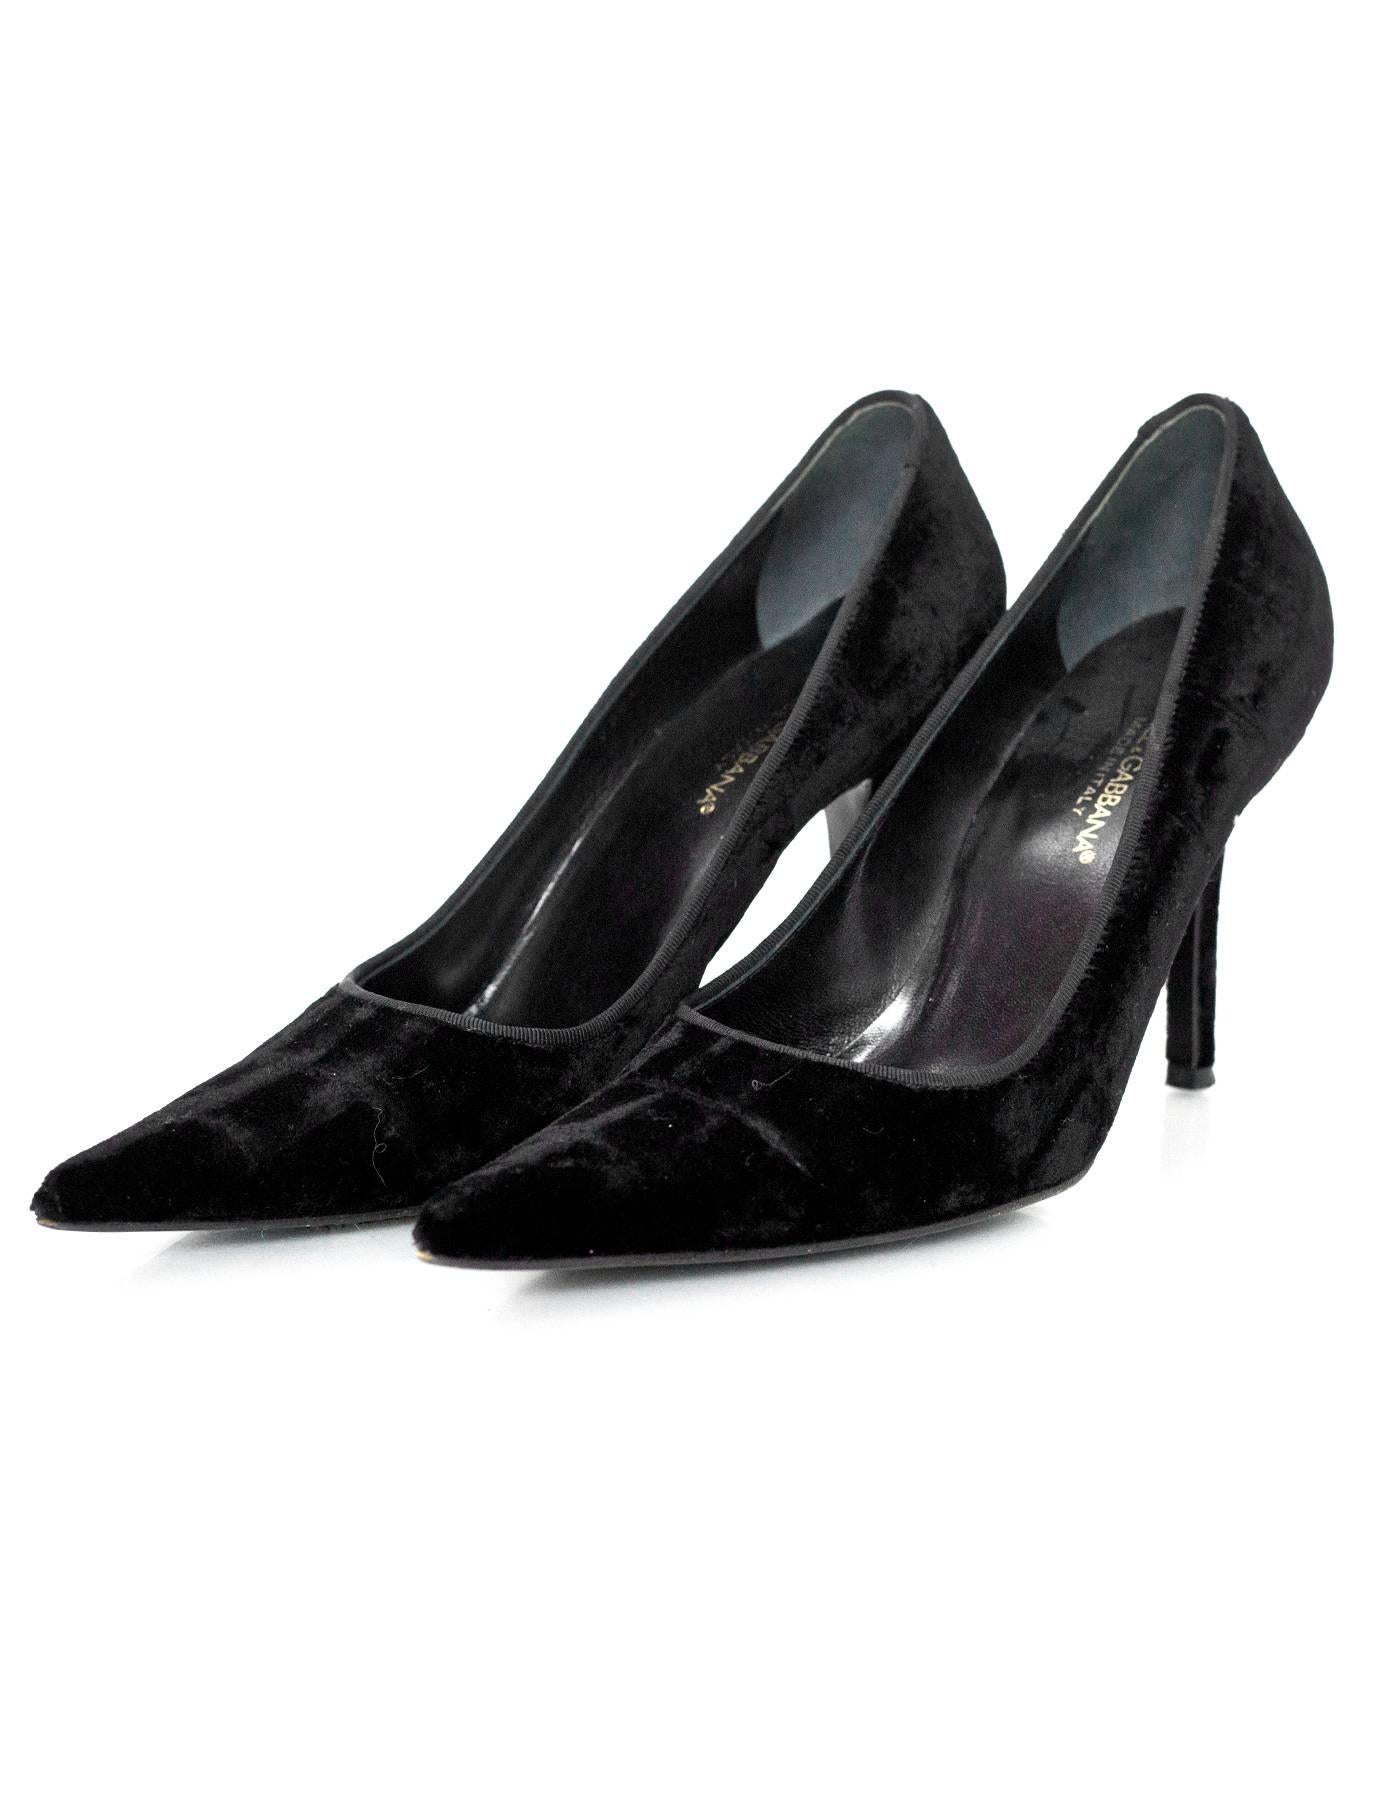 Dolce & Gabbana Black Velvet Pumps Sz 38

Made In: Italy
Color: Black
Materials: Velvet
Closure/Opening: Slide on
Sole Stamp: Dolce & Gabbana Vero Cuoio Made in Italy 38
Overall Condition: Excellent pre-owned vintage condition with the exception of